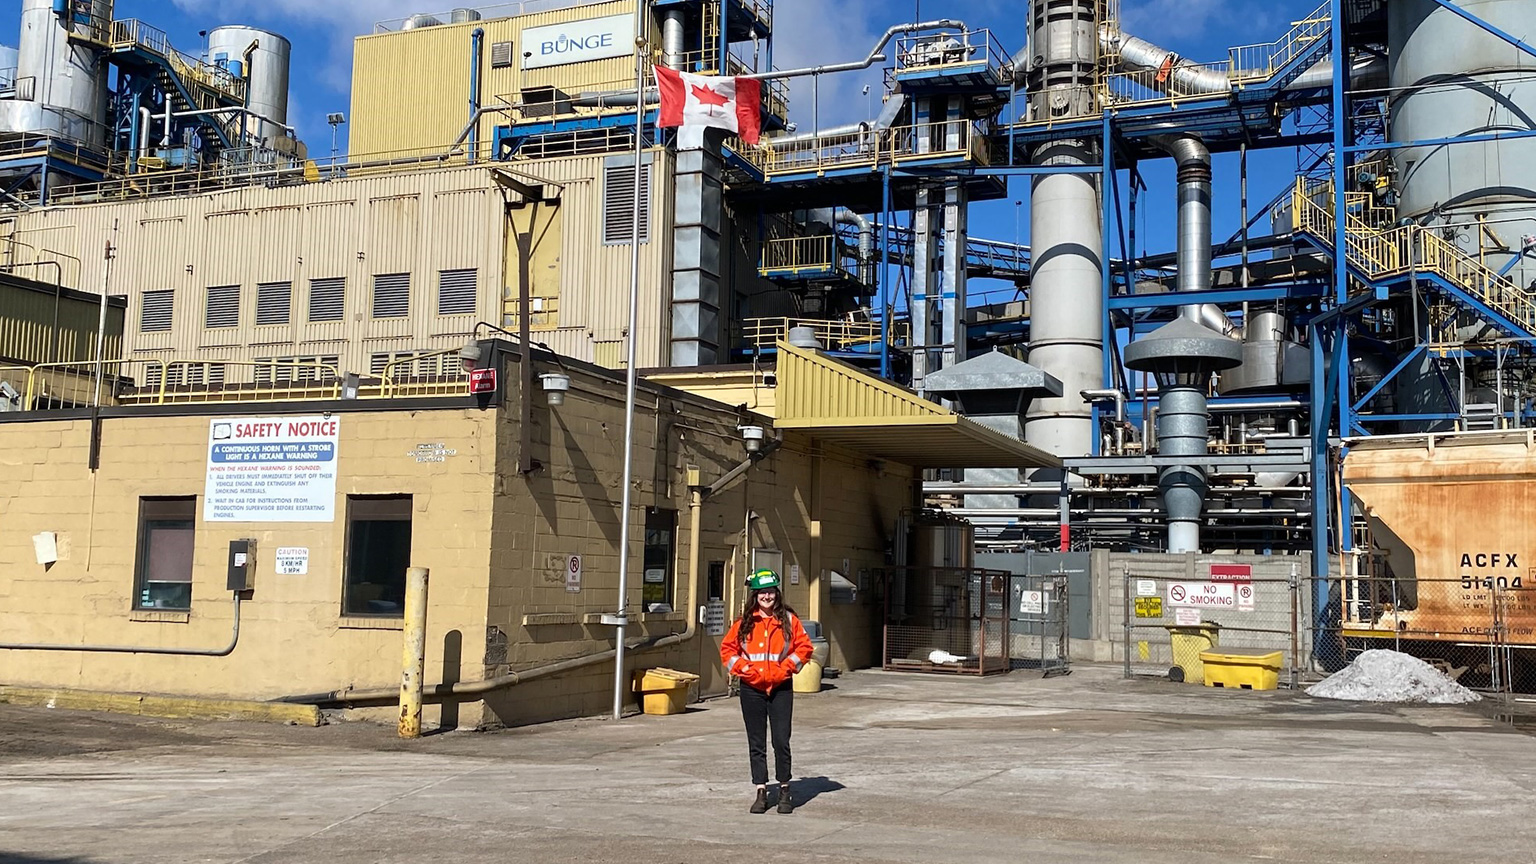 Shayna Earle stands in front of Bunge wearing a safety vest and hard hat